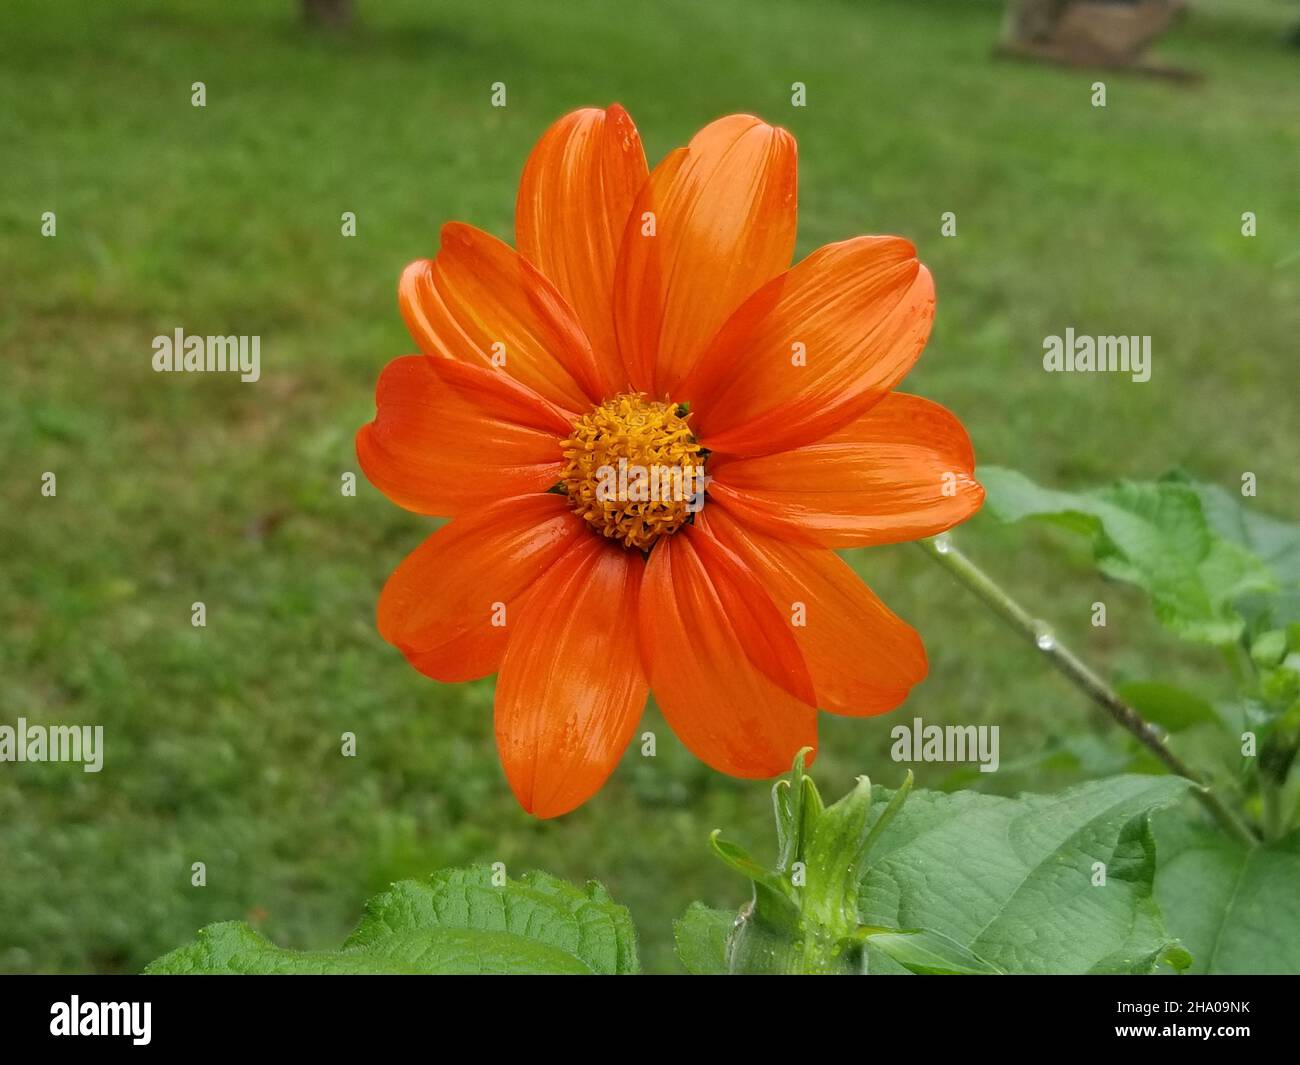 Single, orange colored, garden dahlia, or dahlia pinnata, on a blurred background of green leaves and grass -01 Stock Photo